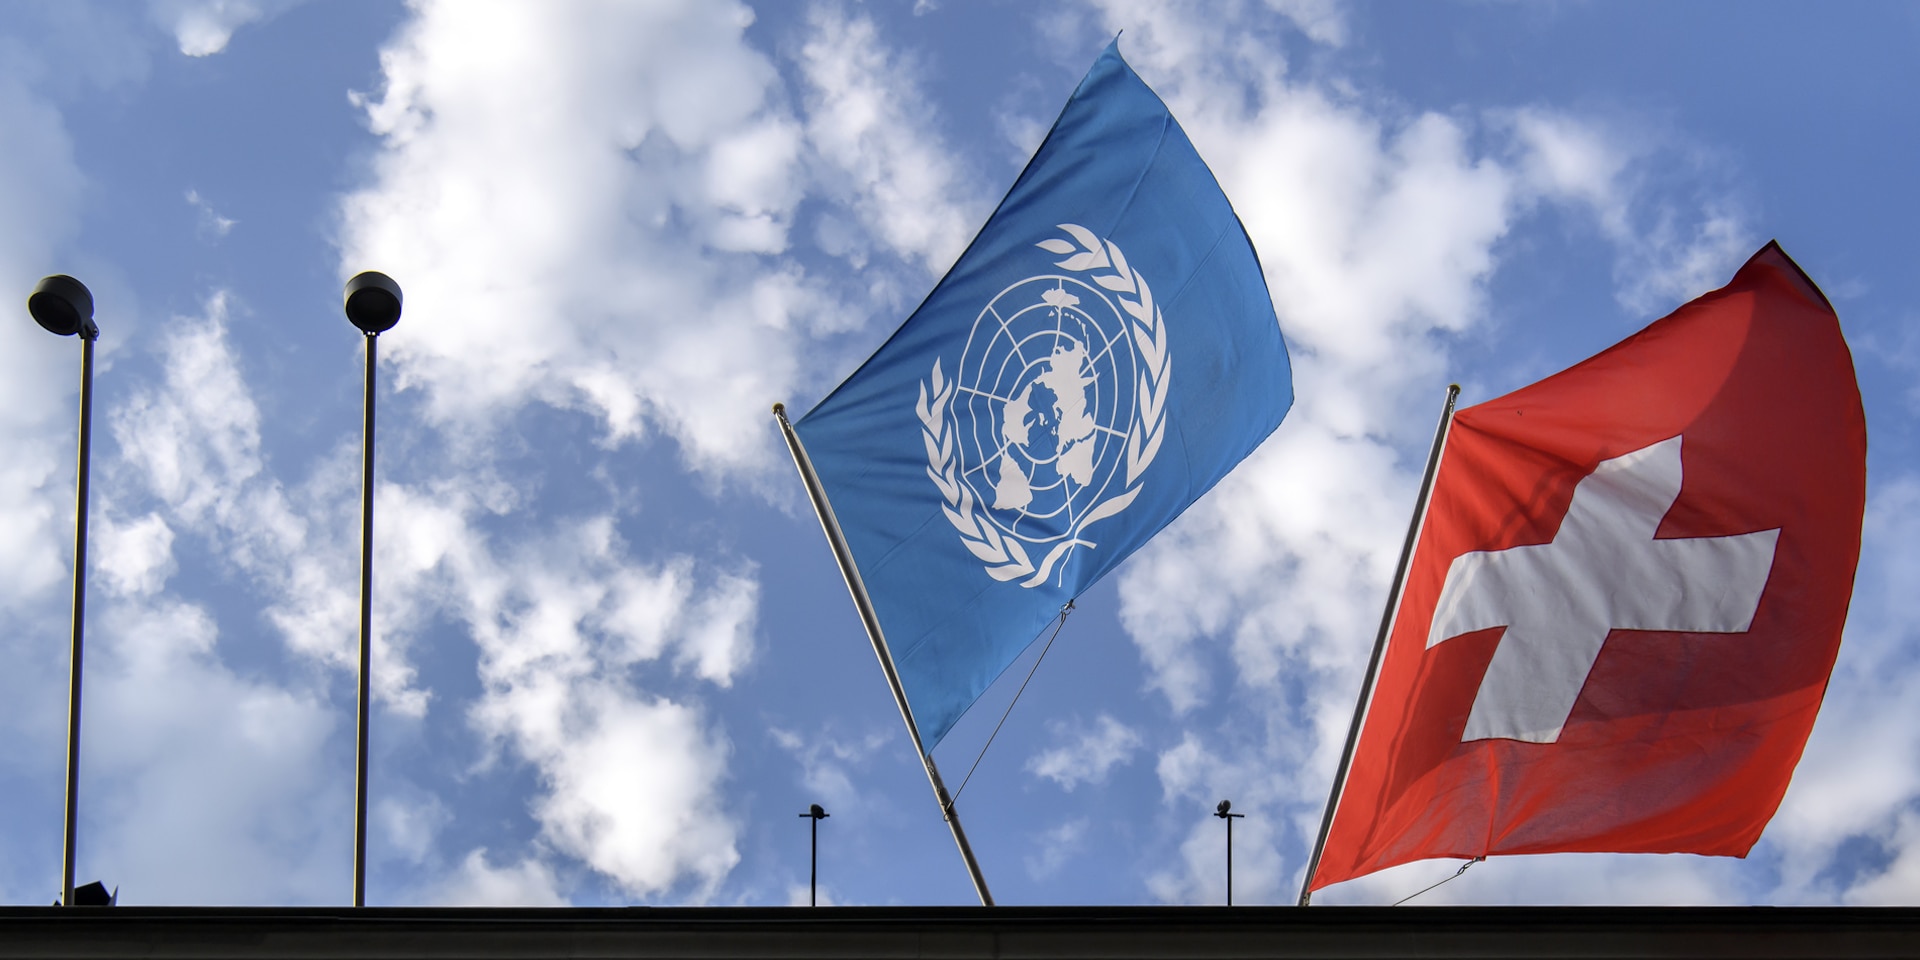 The UN flag, on the left, and the Swiss flag, on the right, flying above the Federal Palace.